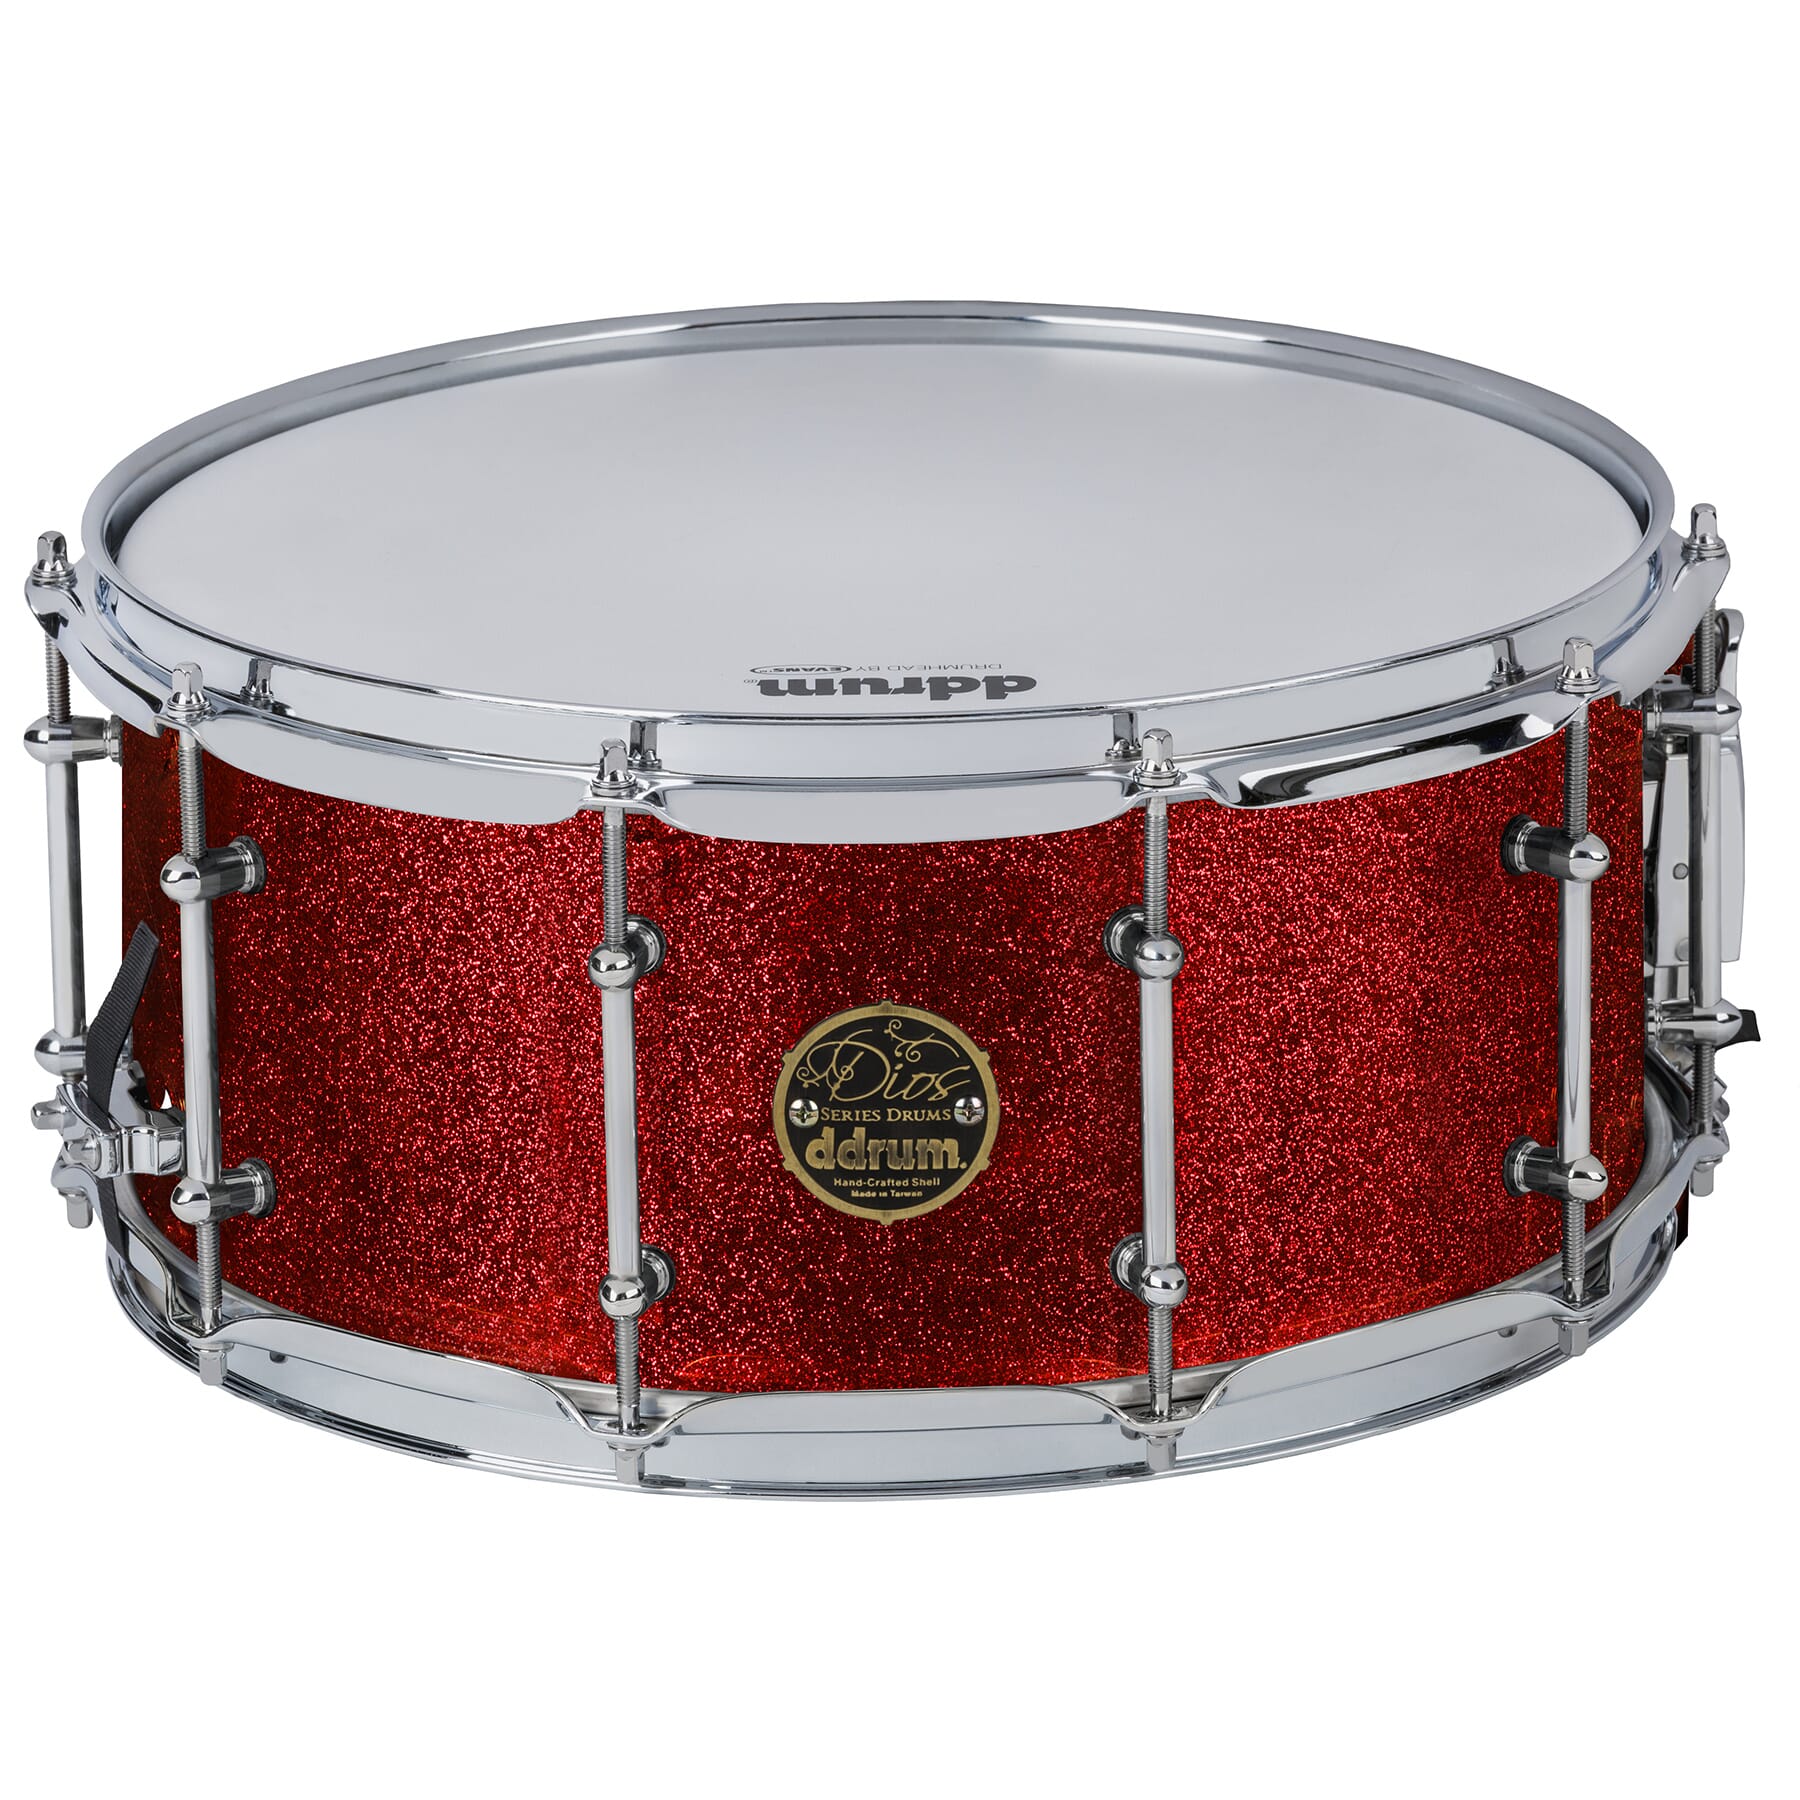 Dios Series Maple 6.5x14 Red Cherry Sparkle Snare Drum | ddrum